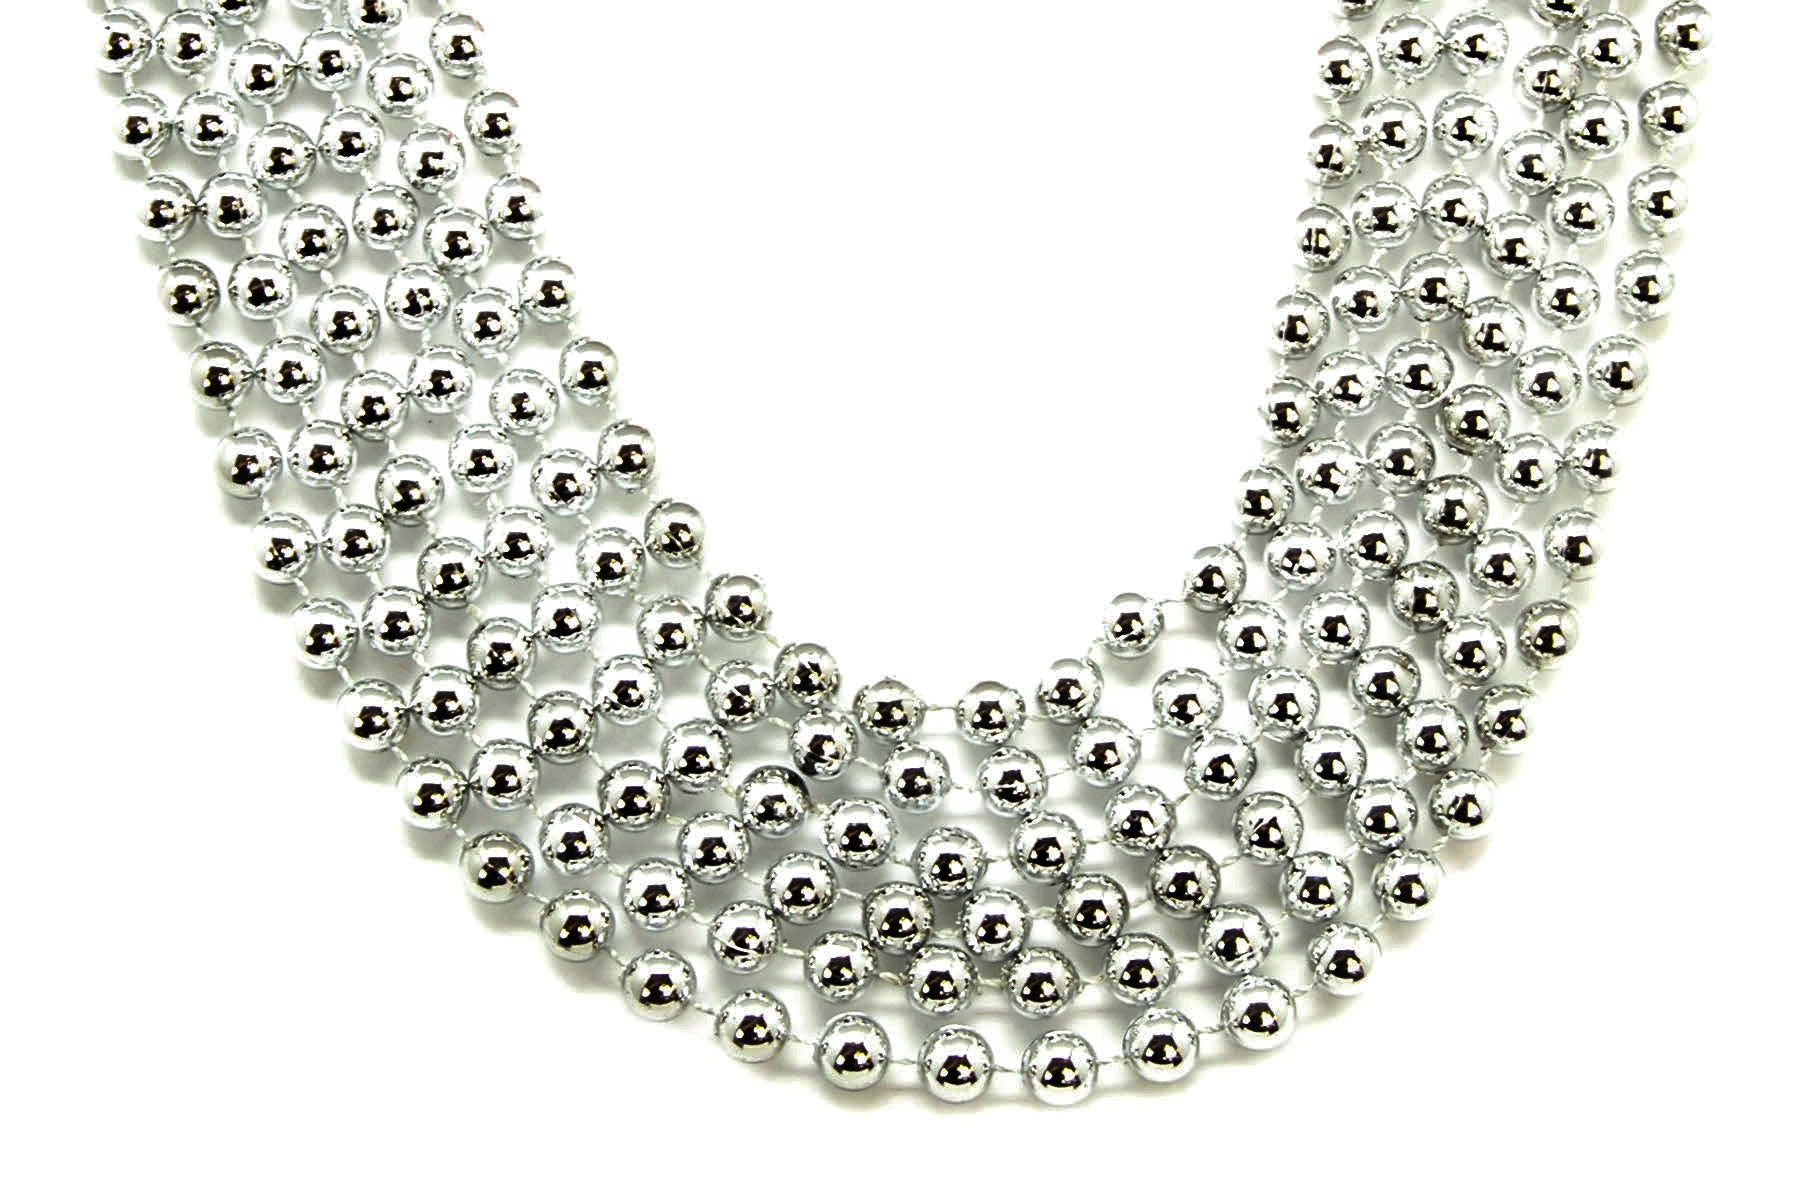 42" 10mm Round Silver Beads